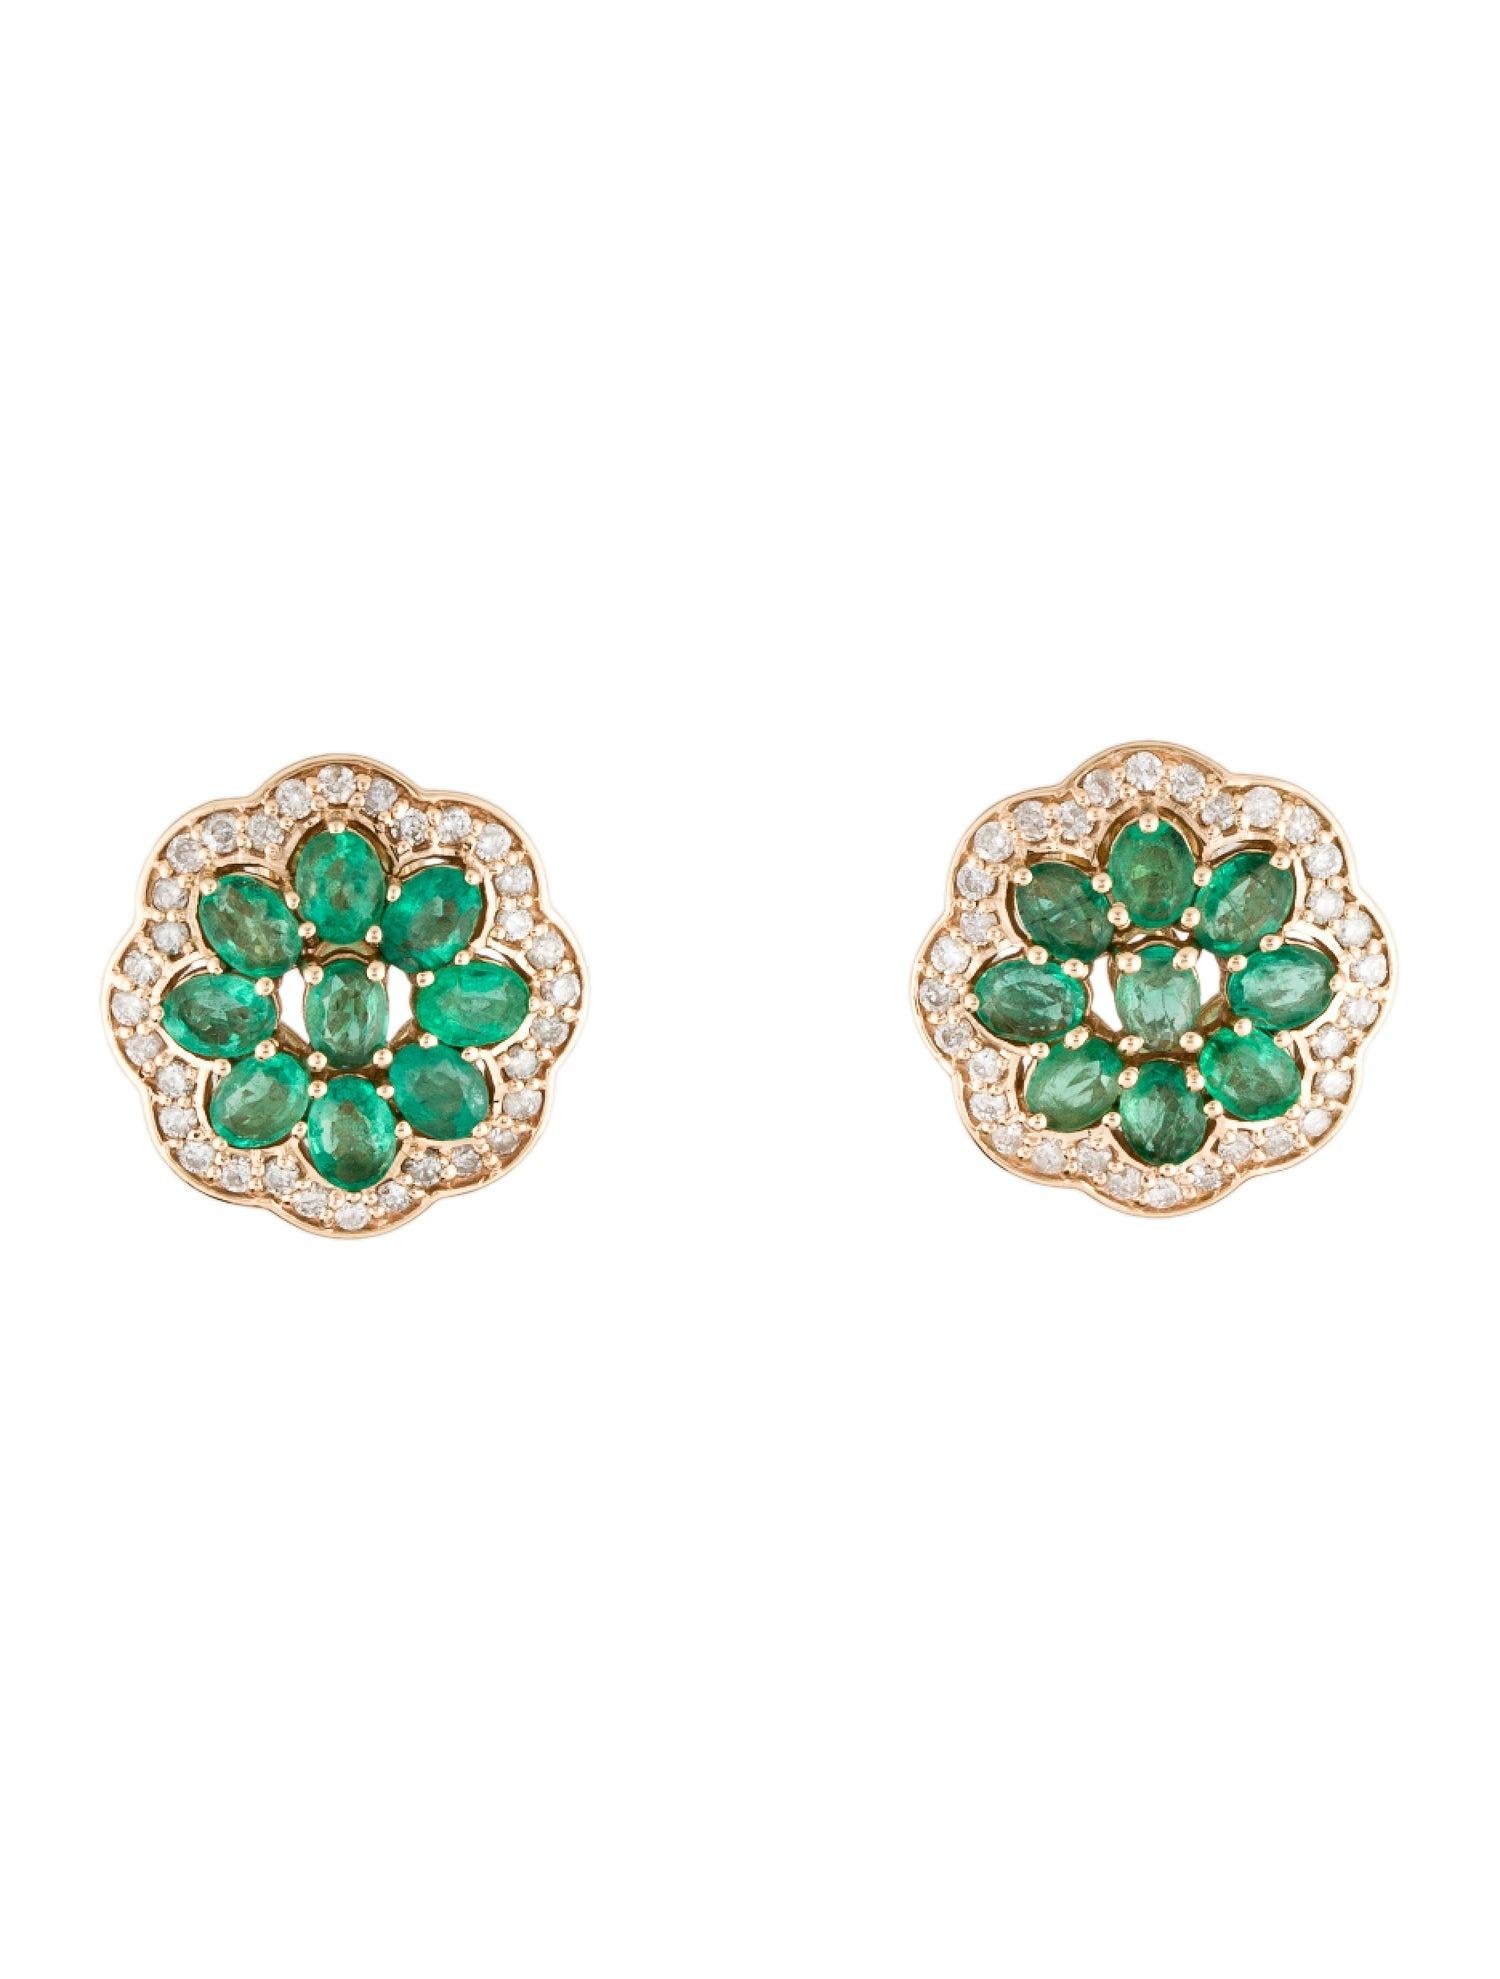 Immerse yourself in the enchanting allure of nature with our Forest Ferns Emerald and Diamond Earrings, a captivating addition to our exquisite collection. Inspired by the verdant beauty of lush forests, these earrings boast the unparalleled